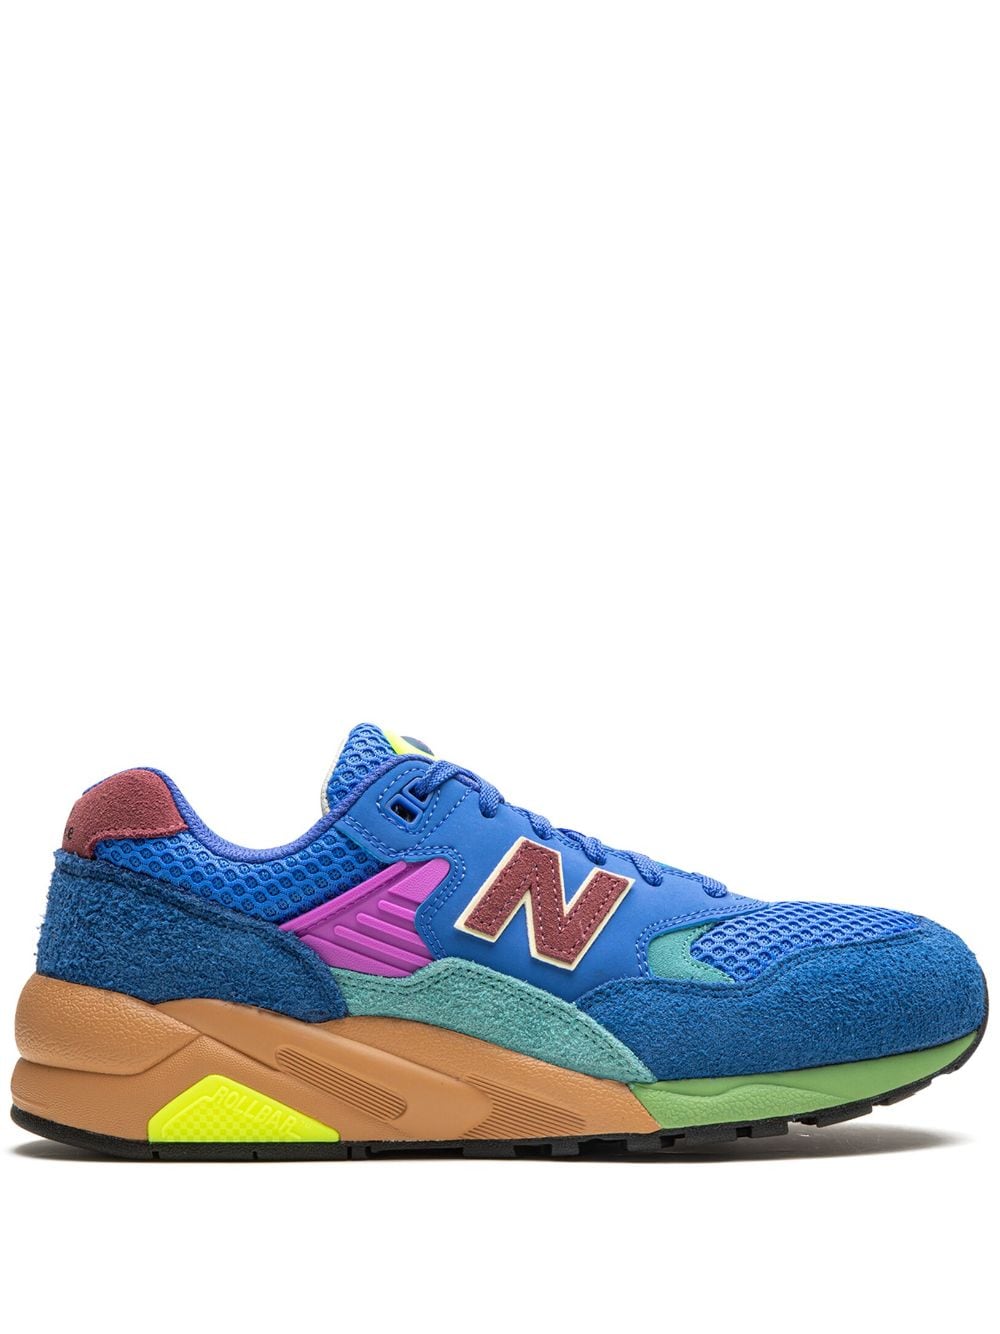 New Balance 580 OG "Blue/Bright Lapis/Washed Burgundy" suede sneakers